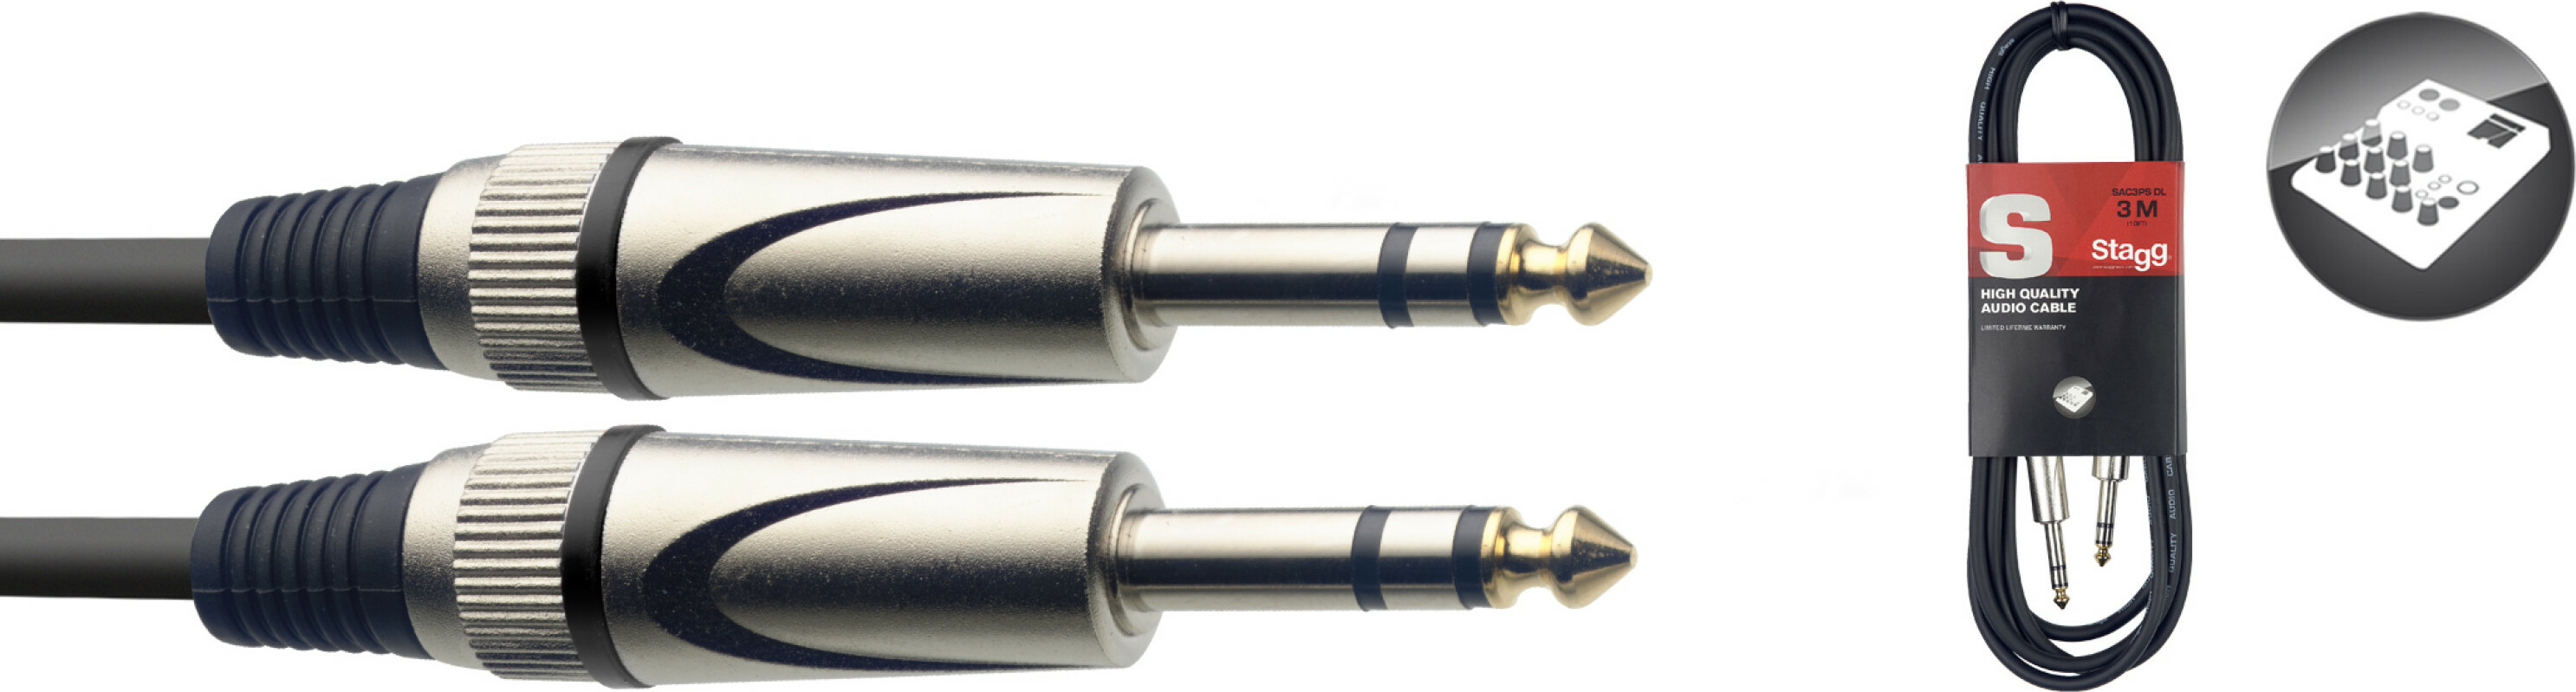 Stagg Sac3ps Dl Cable Audio Jckm Stereo Dlx 3m - Cable - Main picture